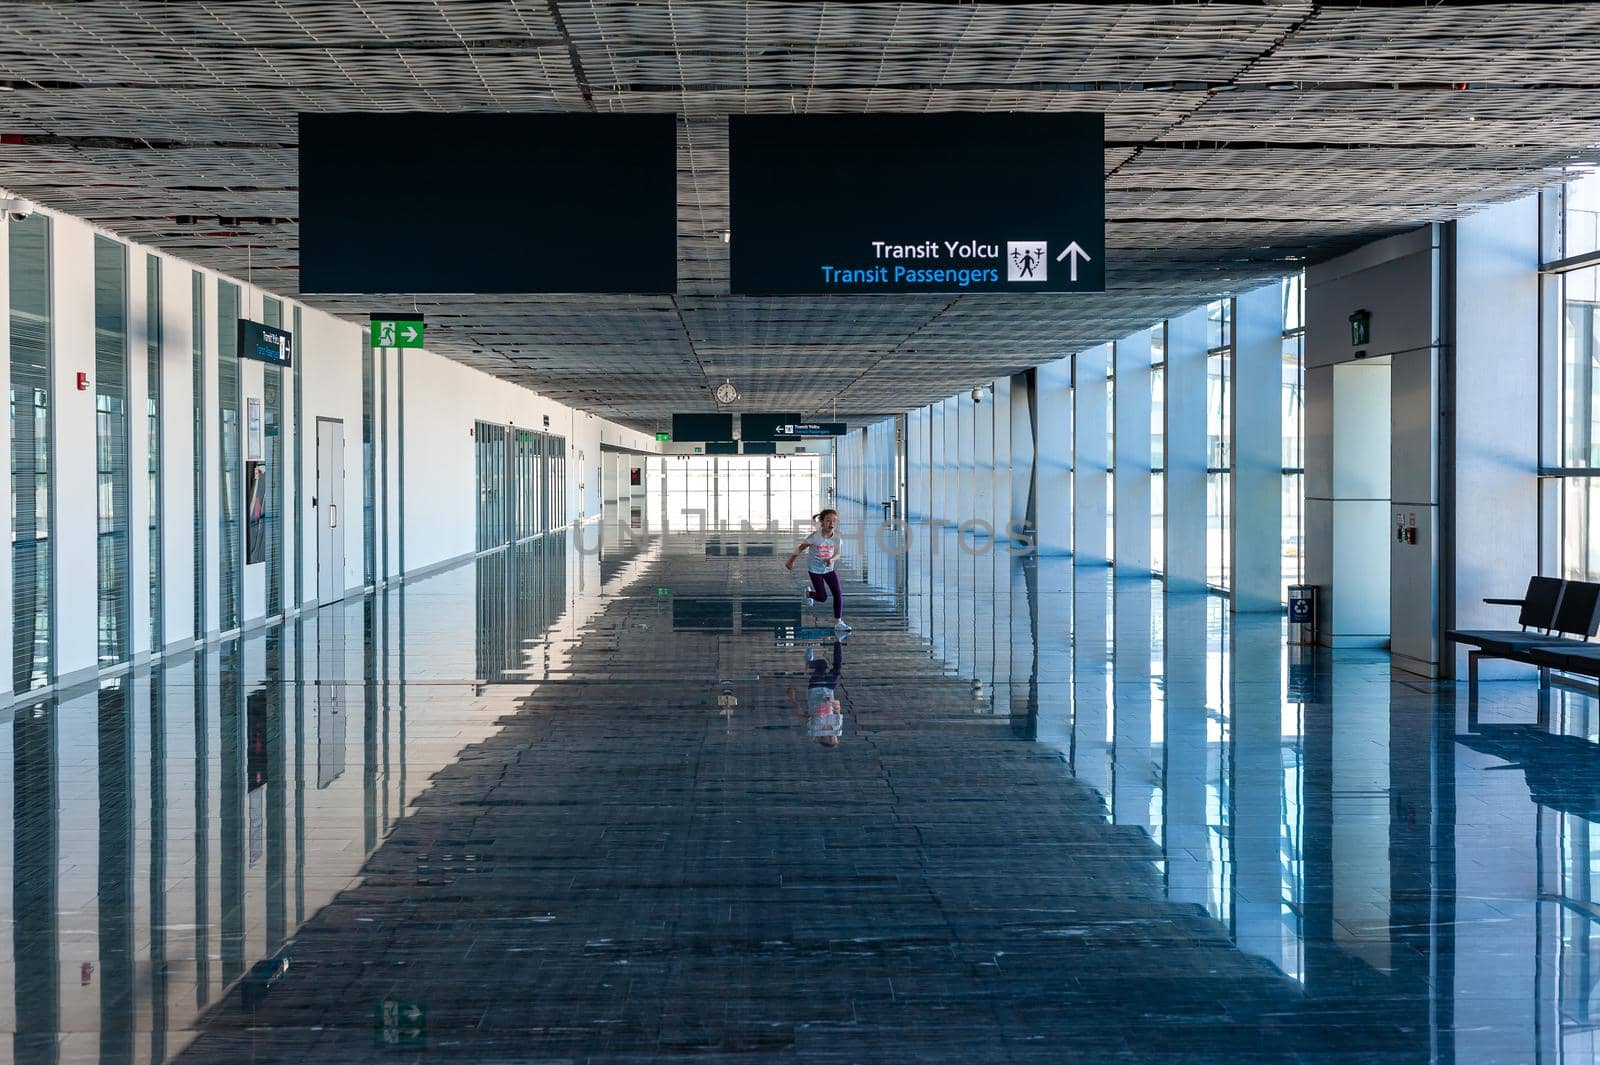 05/26/2019 Bodrum Airport / Milas Mugla Airport. Turkey. Small girl running along long corridor out of boredom while awaiting for her flight. by Qba